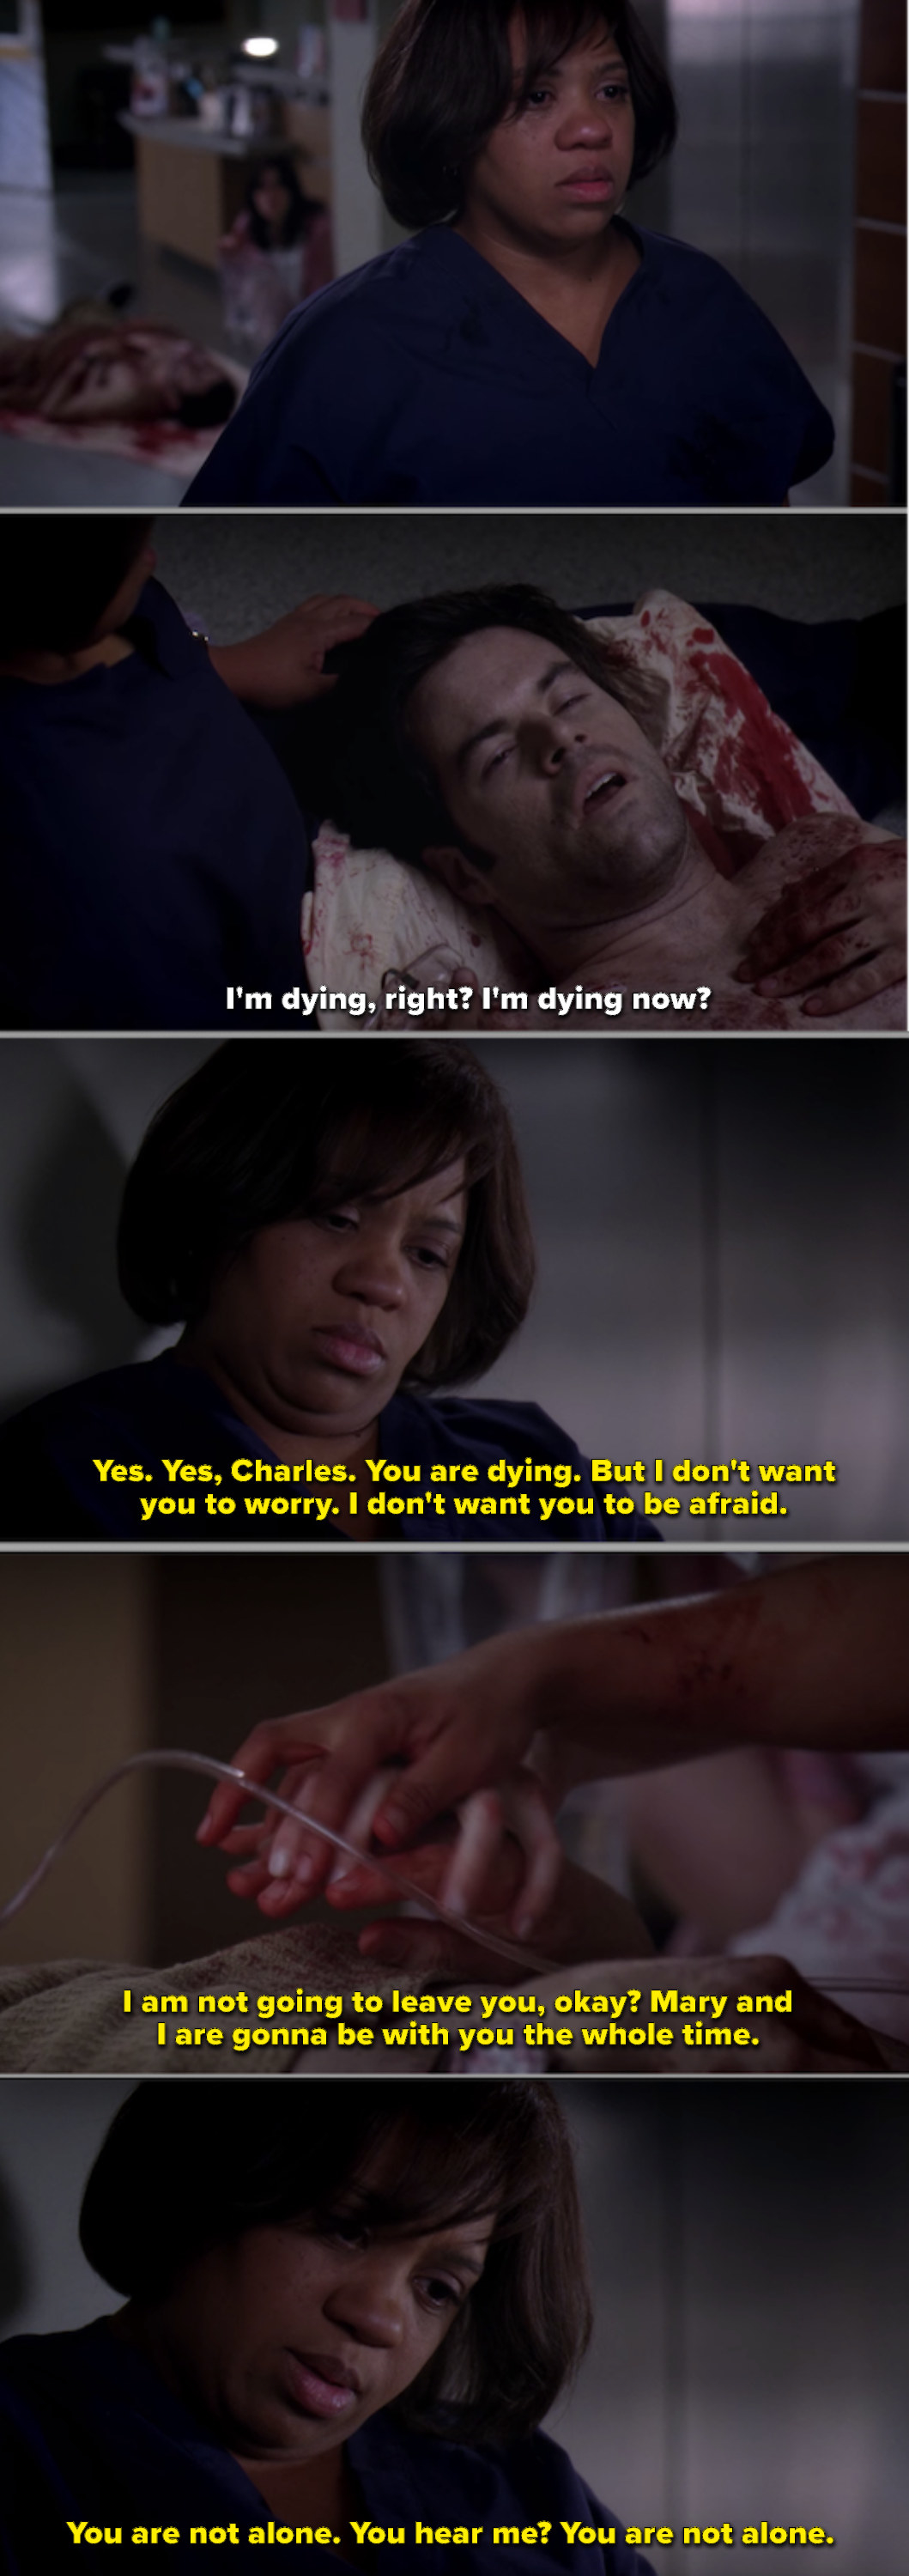 Dr. Bailey comforting Charles as he bleeds out in the hallway